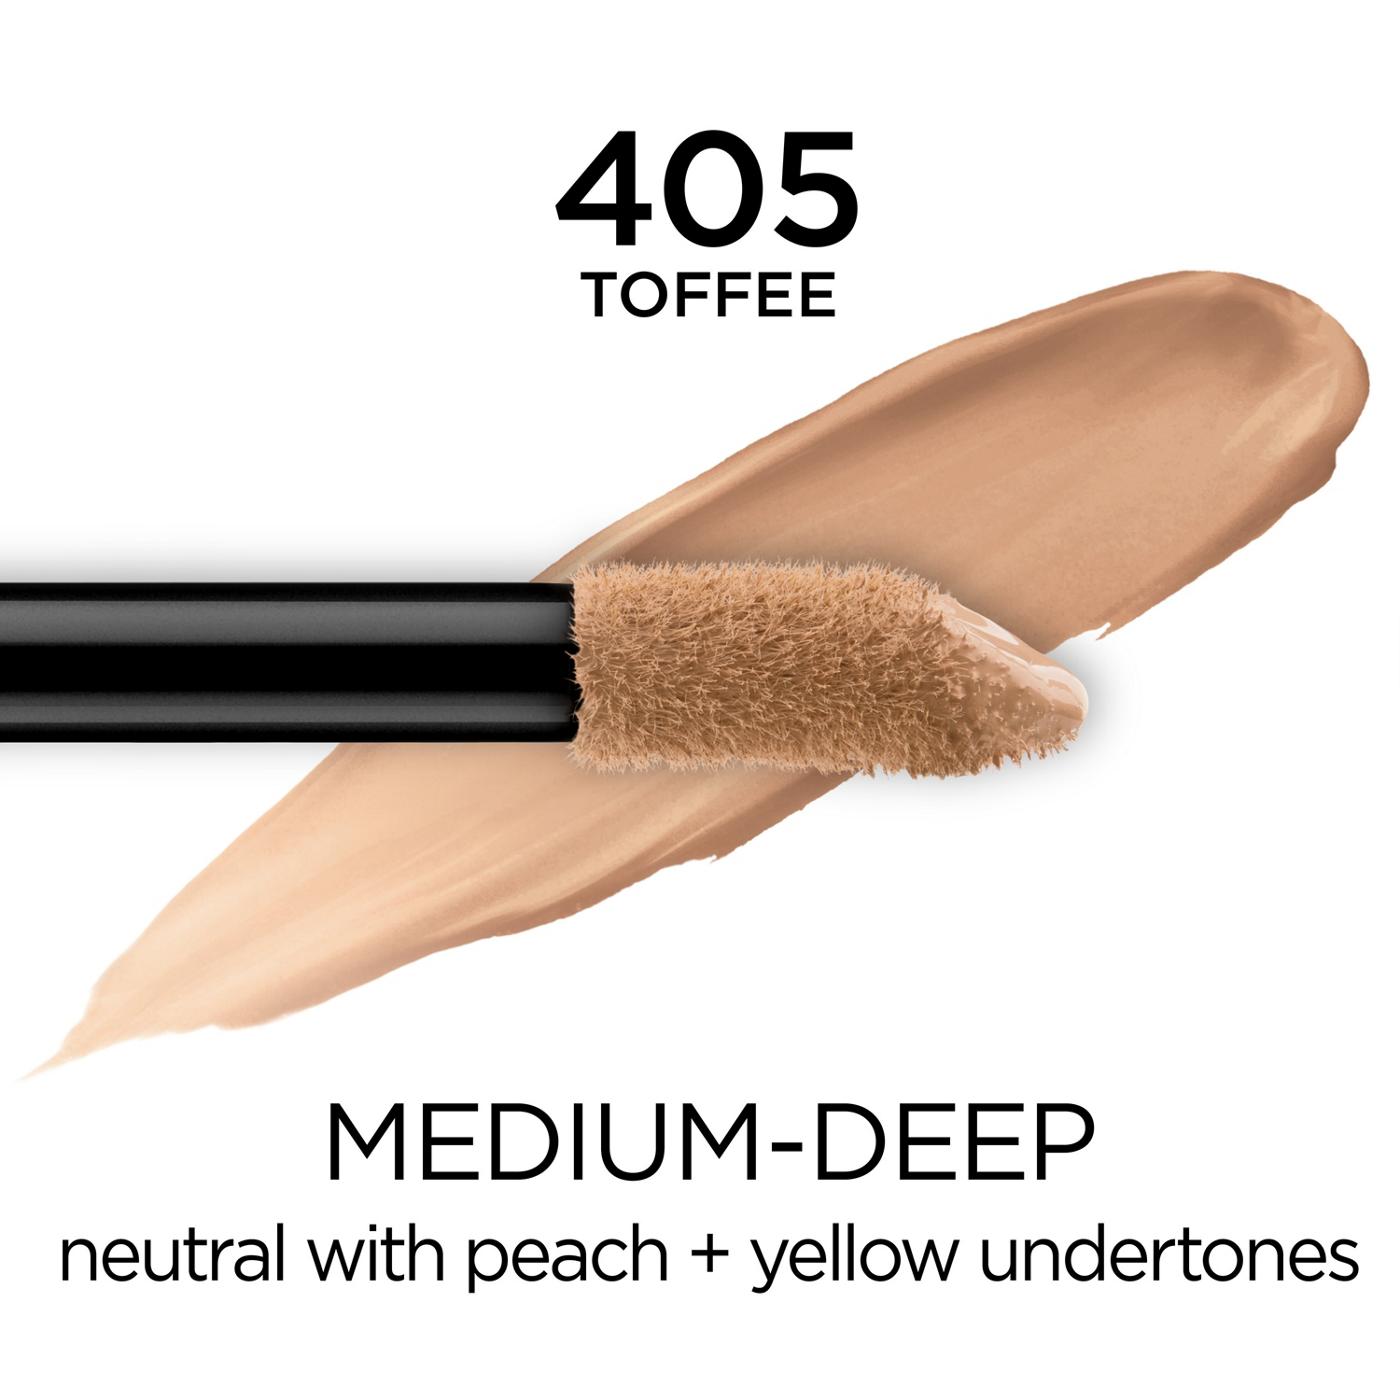 L'Oréal Paris Infallible Full Wear Concealer up to 24H Full Coverage Toffee; image 2 of 8